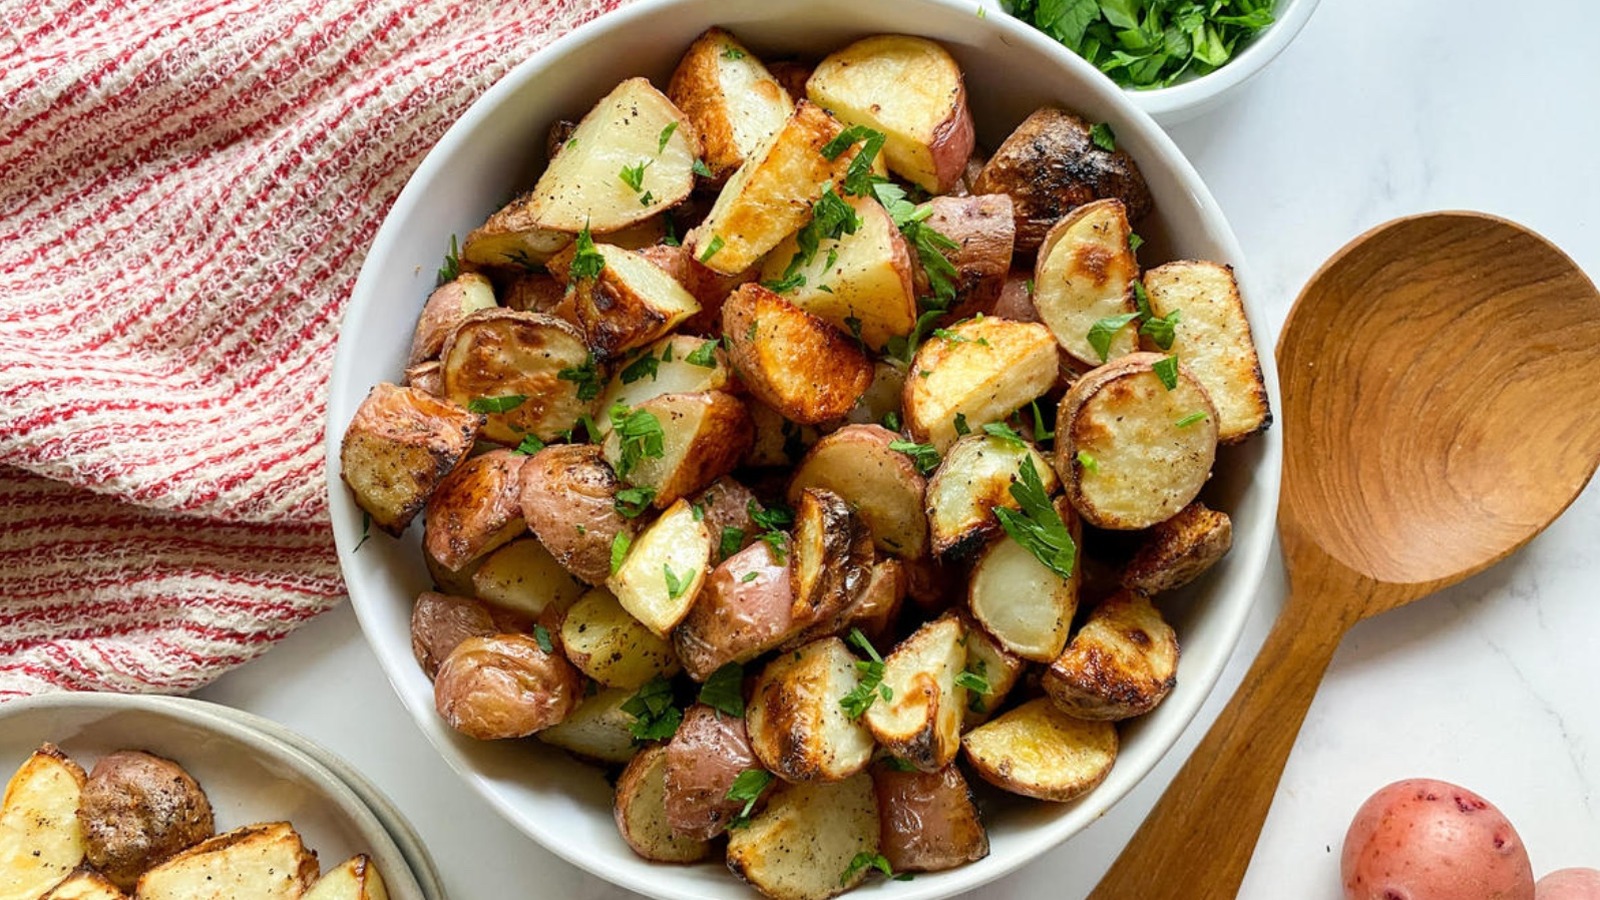 Sunny anderson roasted potatoes